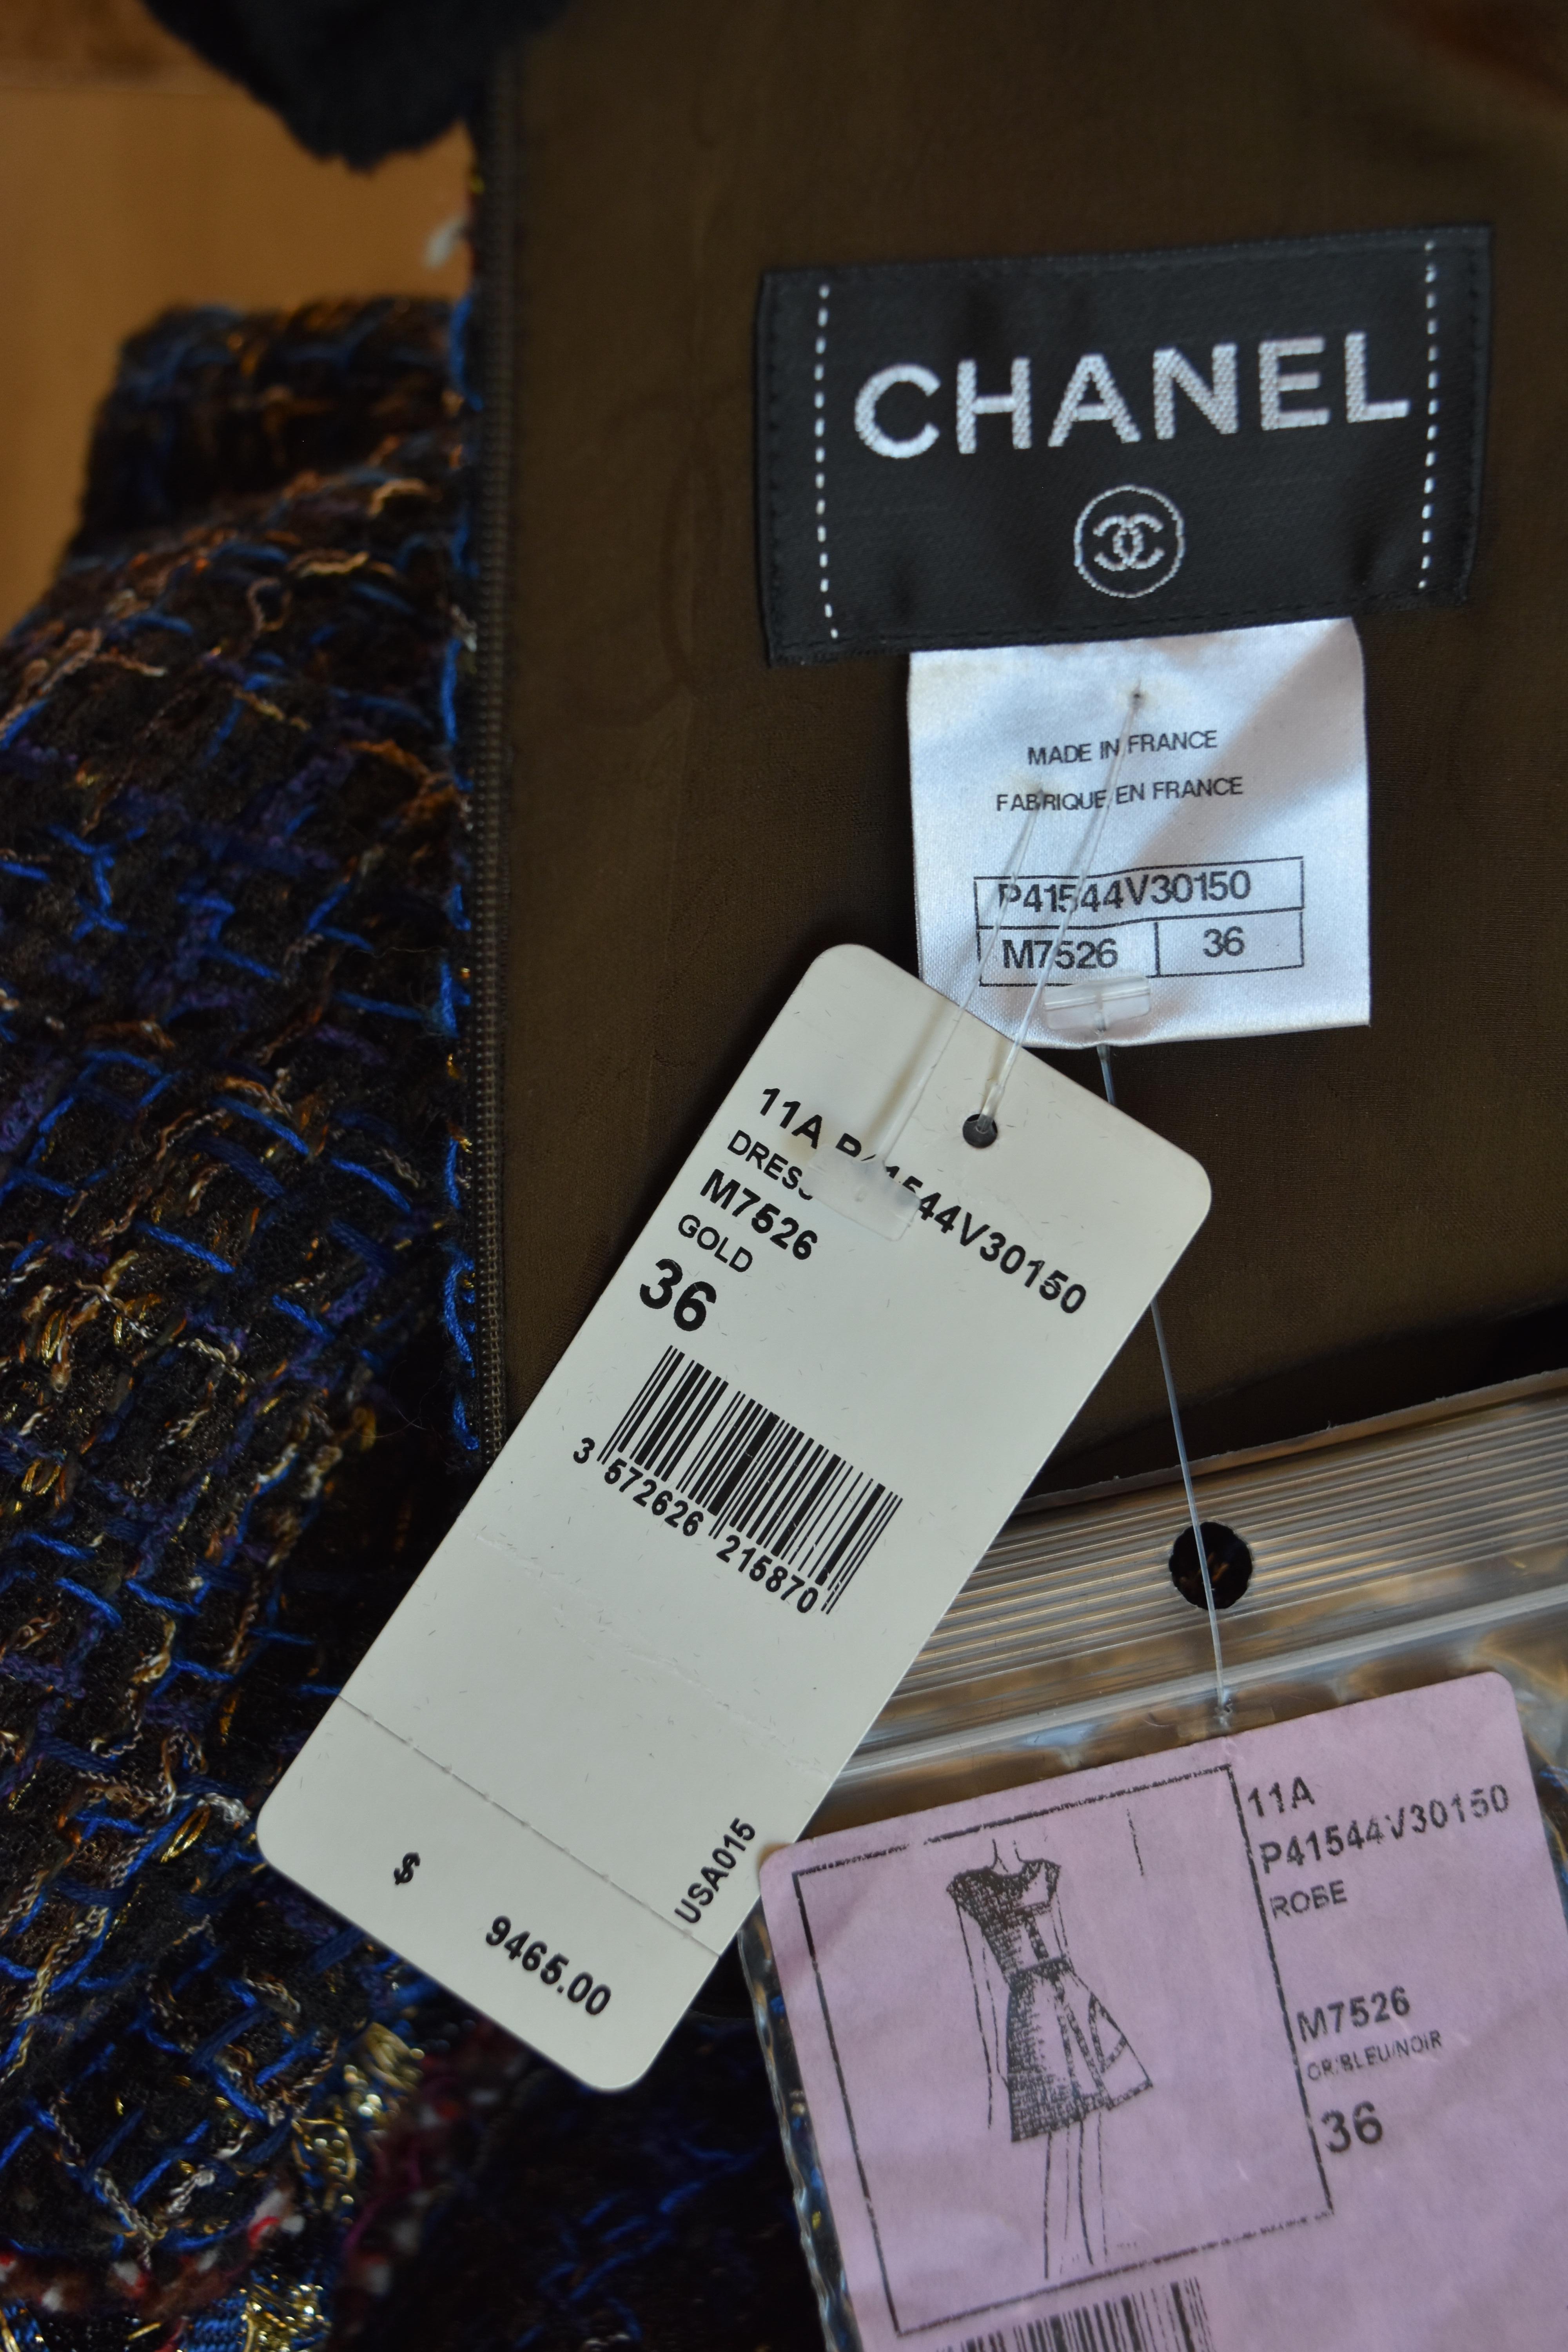 Chanel NWT 11A Fall 2011 Tweed Dress with CC logo 36 Rare New For Sale 2